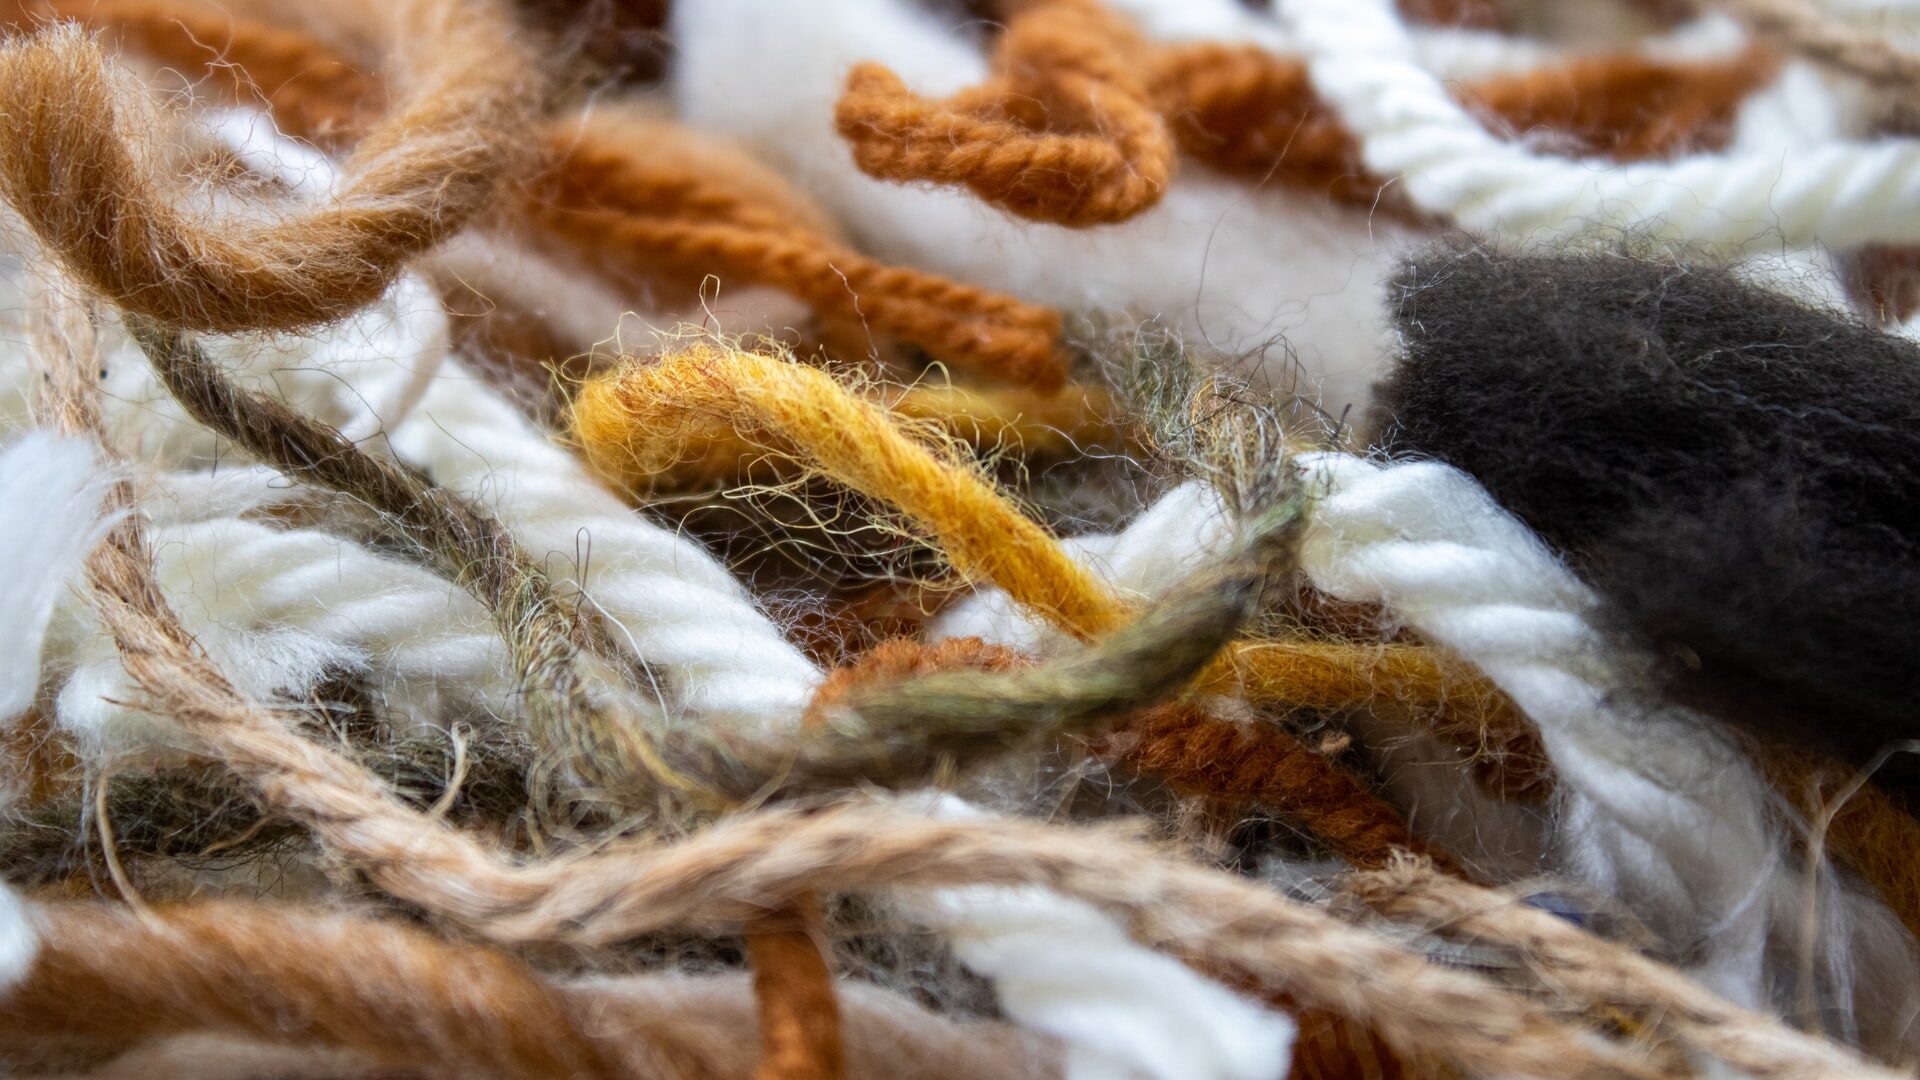 A collection of wool and textiles.